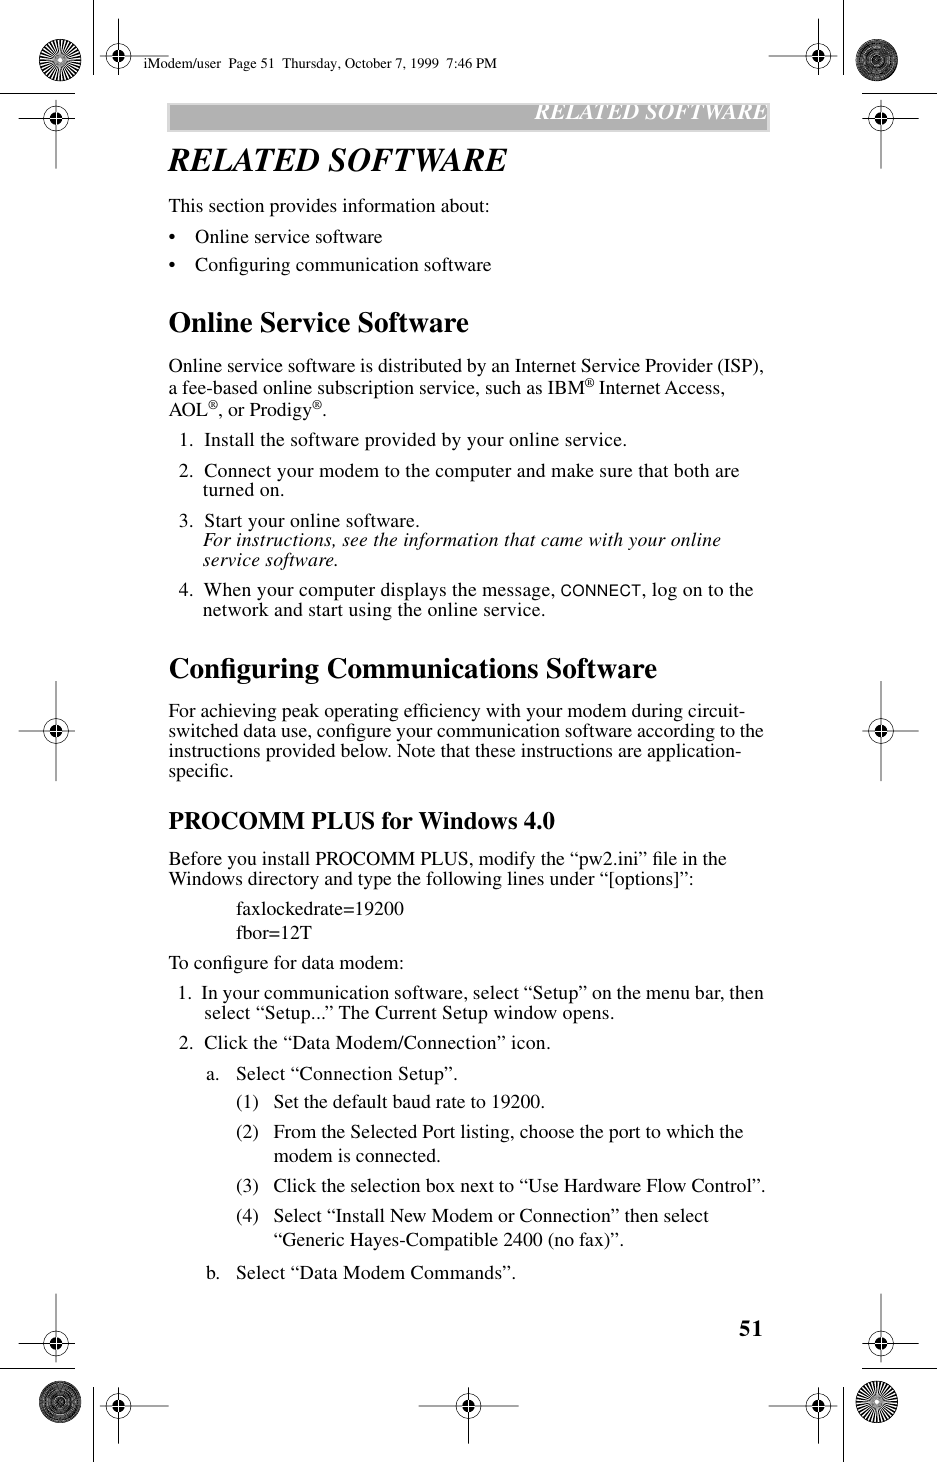 51   RELATED SOFTWARERELATED SOFTWAREThis section provides information about:•    Online service software•    Conﬁguring communication softwareOnline Service SoftwareOnline service software is distributed by an Internet Service Provider (ISP), a fee-based online subscription service, such as IBM® Internet Access, AOL®, or Prodigy®.   1.  Install the software provided by your online service.  2.  Connect your modem to the computer and make sure that both are turned on.  3.  Start your online software. For instructions, see the information that came with your online service software.  4.  When your computer displays the message, CONNECT, log on to the network and start using the online service.Conﬁguring Communications SoftwareFor achieving peak operating efﬁciency with your modem during circuit-switched data use, conﬁgure your communication software according to the instructions provided below. Note that these instructions are application-speciﬁc.PROCOMM PLUS for Windows 4.0Before you install PROCOMM PLUS, modify the “pw2.ini” ﬁle in the Windows directory and type the following lines under “[options]”: faxlockedrate=19200fbor=12TTo conﬁgure for data modem:  1.  In your communication software, select “Setup” on the menu bar, then select “Setup...” The Current Setup window opens.  2.  Click the “Data Modem/Connection” icon.a. Select “Connection Setup”. (1) Set the default baud rate to 19200.(2) From the Selected Port listing, choose the port to which the modem is connected.(3) Click the selection box next to “Use Hardware Flow Control”.(4) Select “Install New Modem or Connection” then select “Generic Hayes-Compatible 2400 (no fax)”.b. Select “Data Modem Commands”.iModem/user  Page 51  Thursday, October 7, 1999  7:46 PM